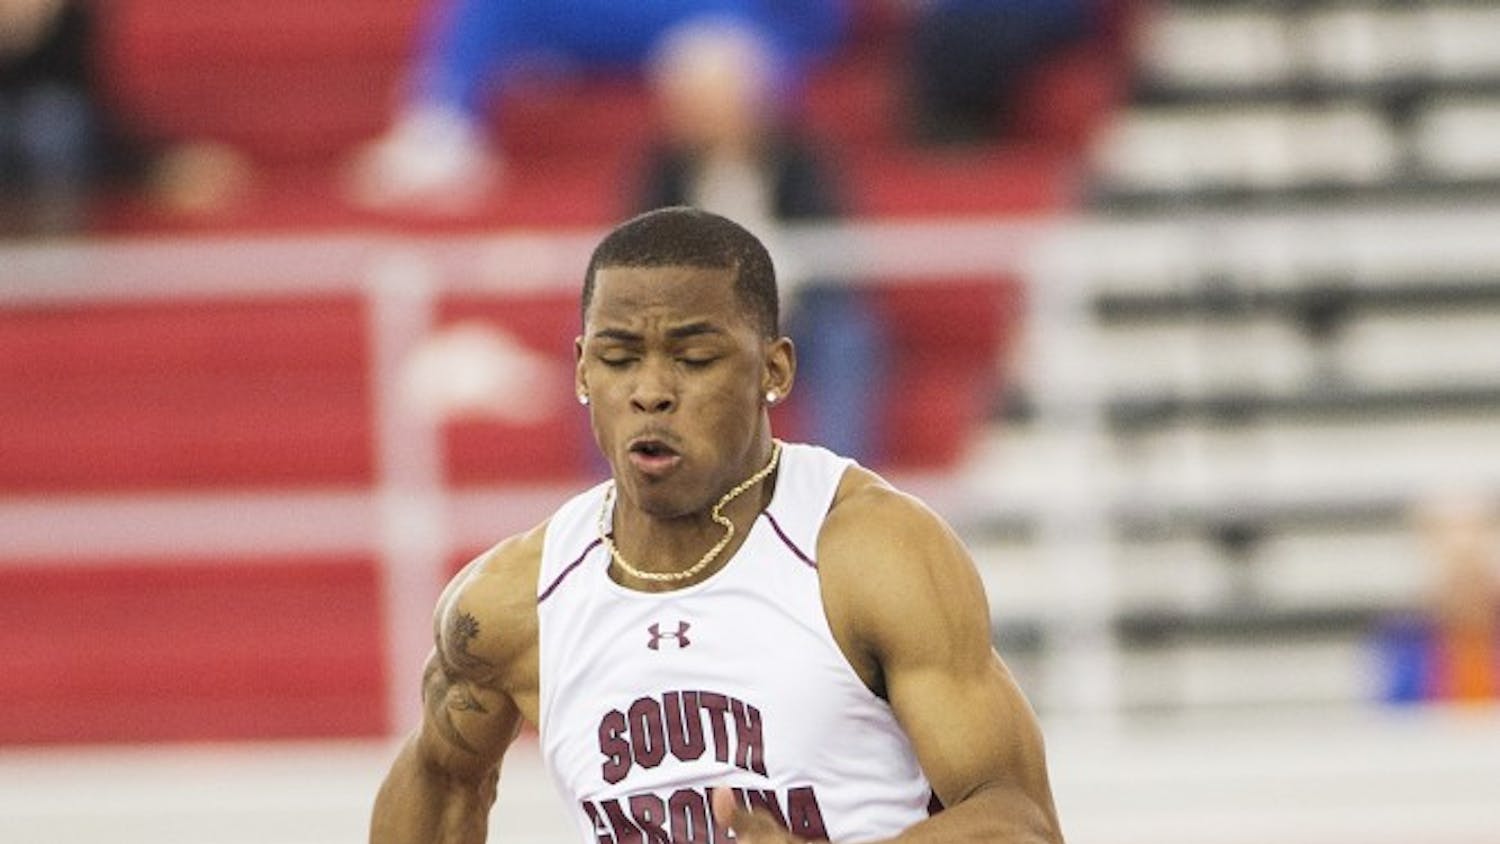 SEC Indoor Track Championships 2013 at the Randall Tyson Track Center in Fayetteville, Ark.